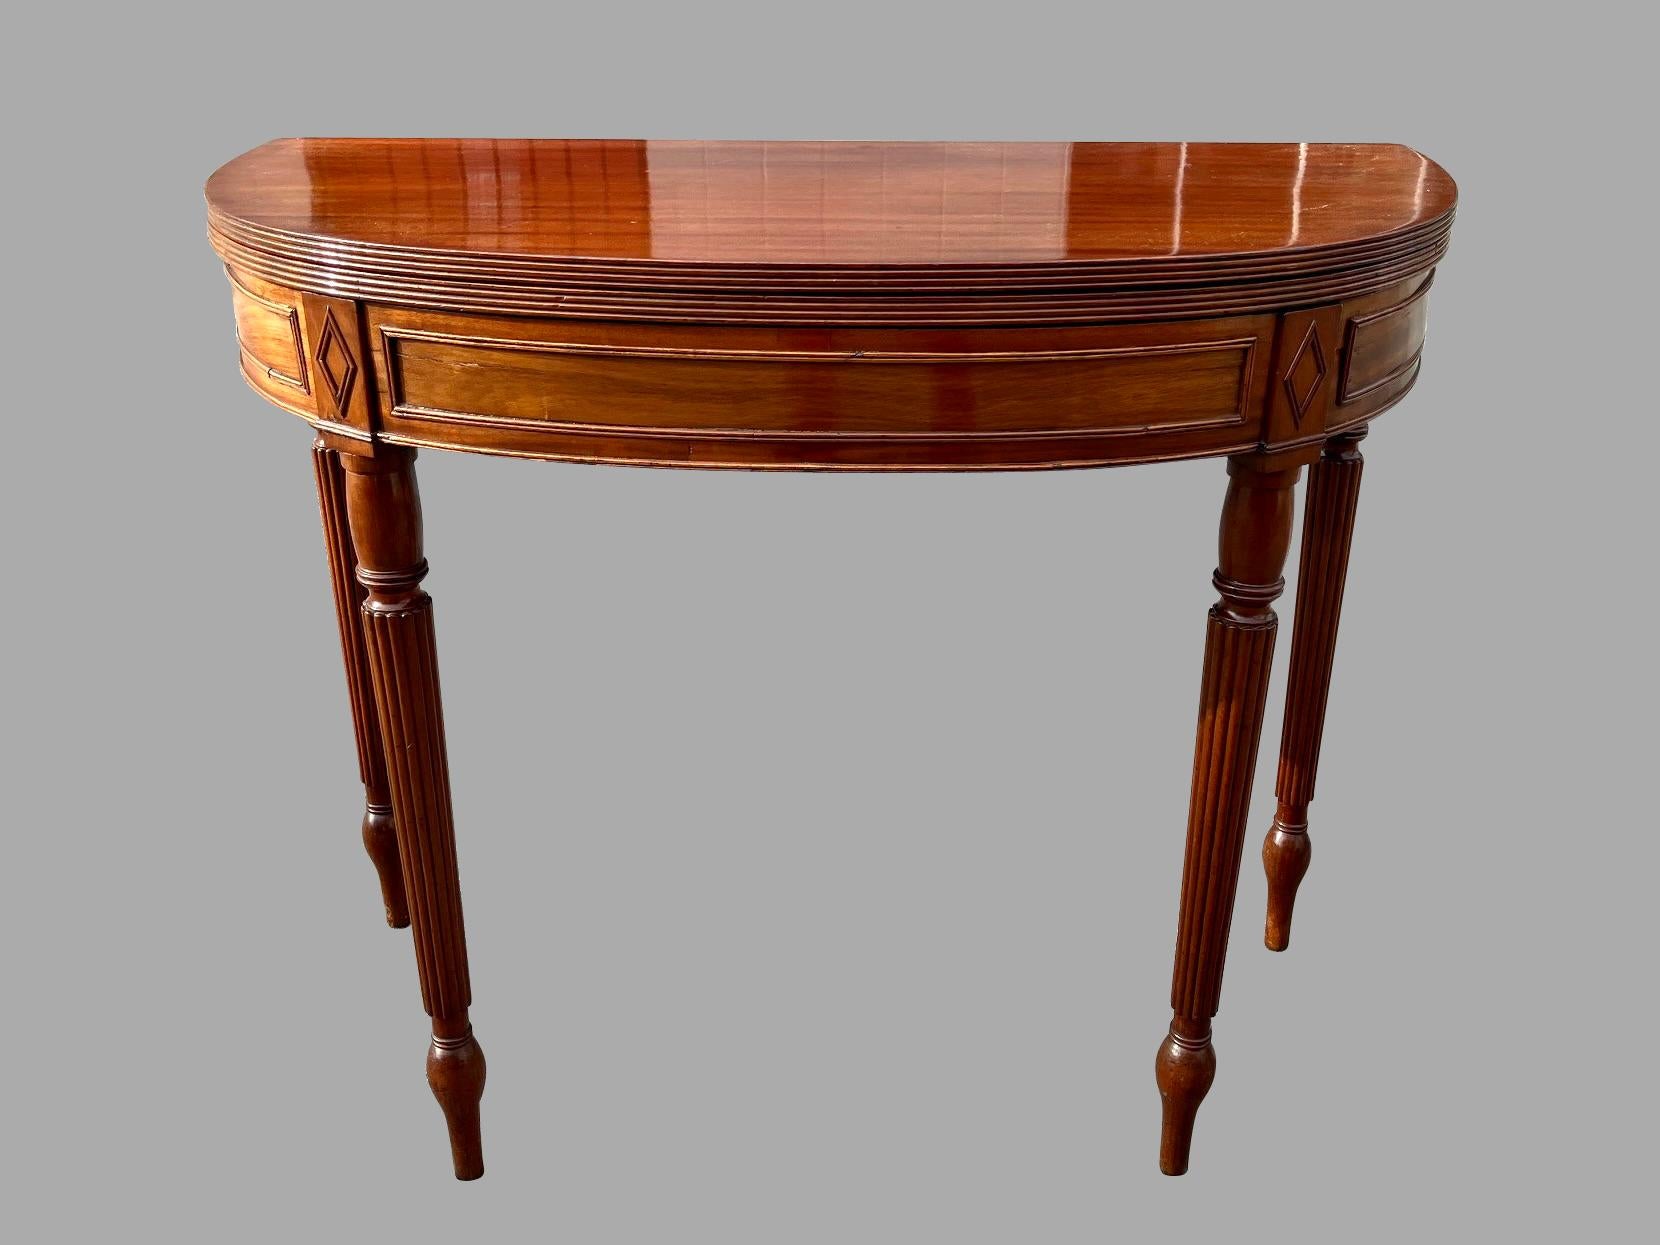 English Regency Period Mahogany Flip Top Game or Tea Table with Reeded Legs For Sale 4